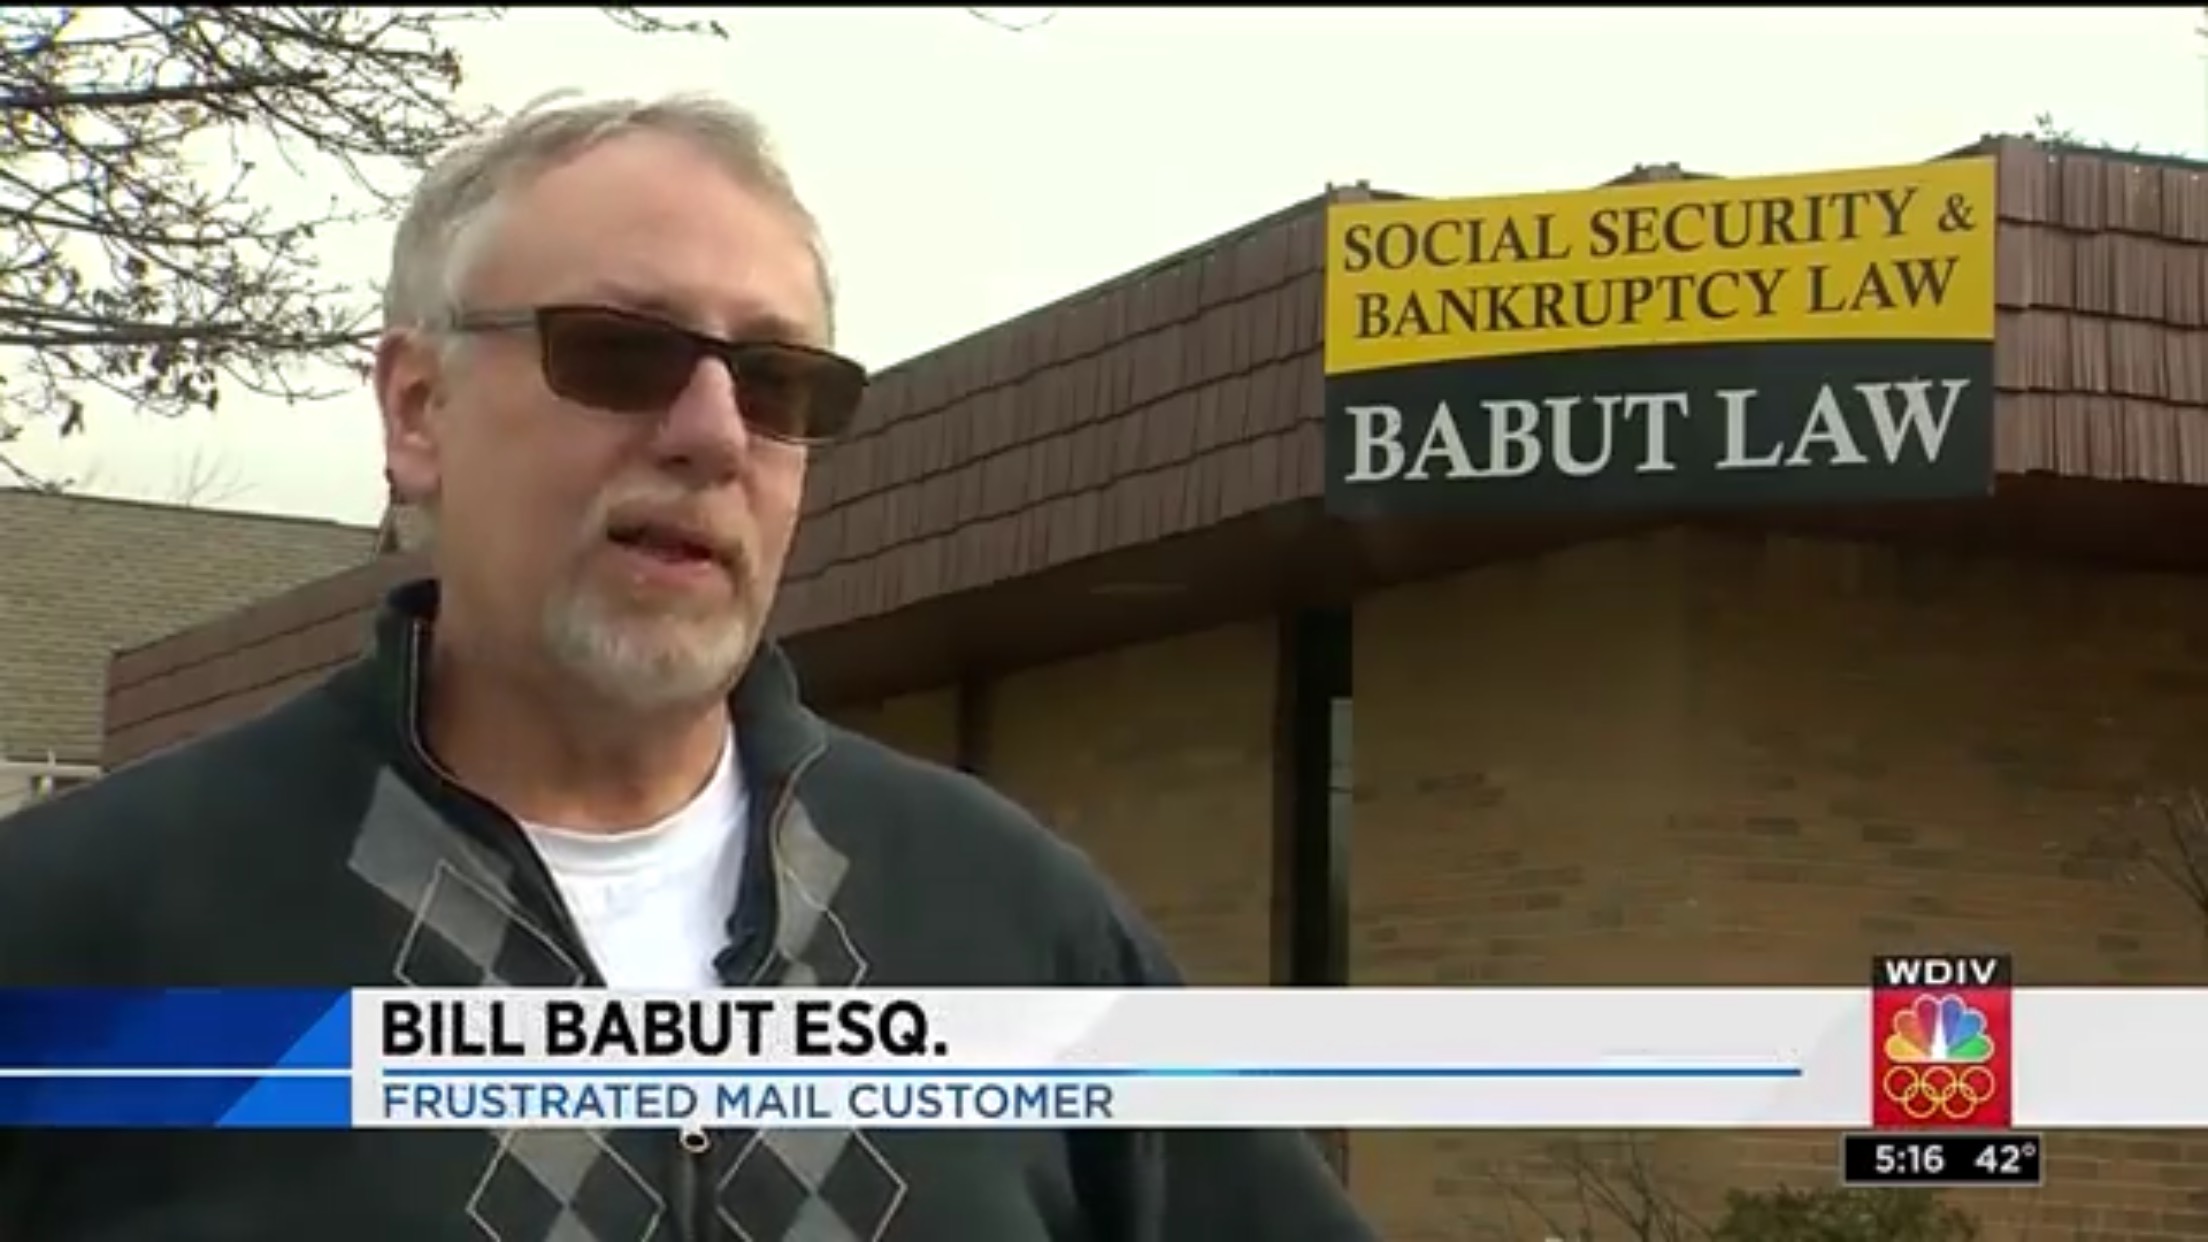 Bill Babut Esq.: Frustrated Mail Customer. In the background is a sign for "Babut Law"